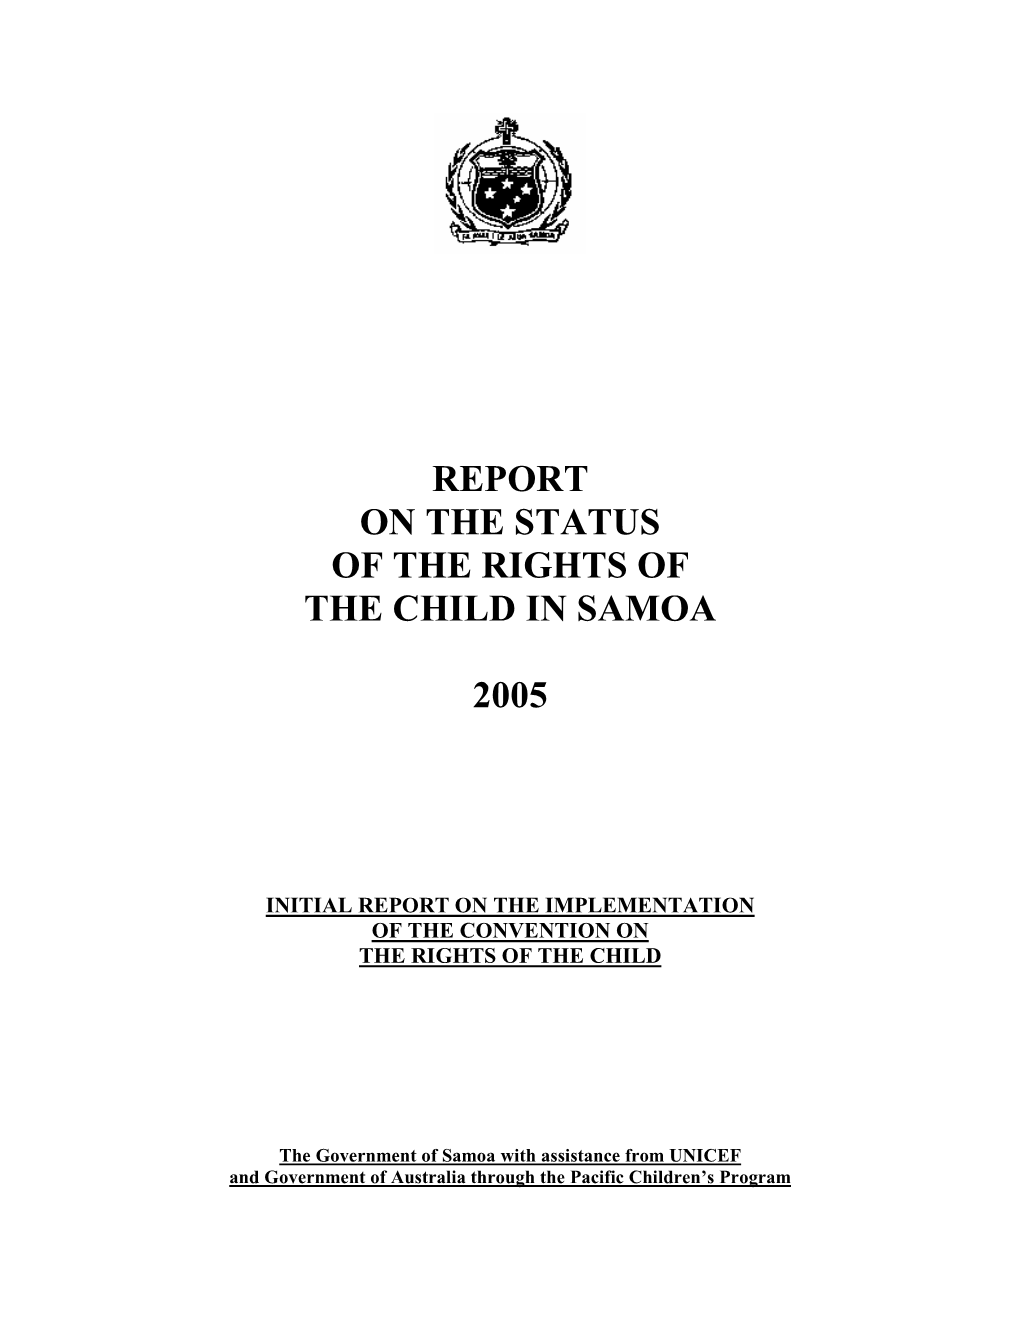 Report on the Status of the Rights of the Child in Samoa